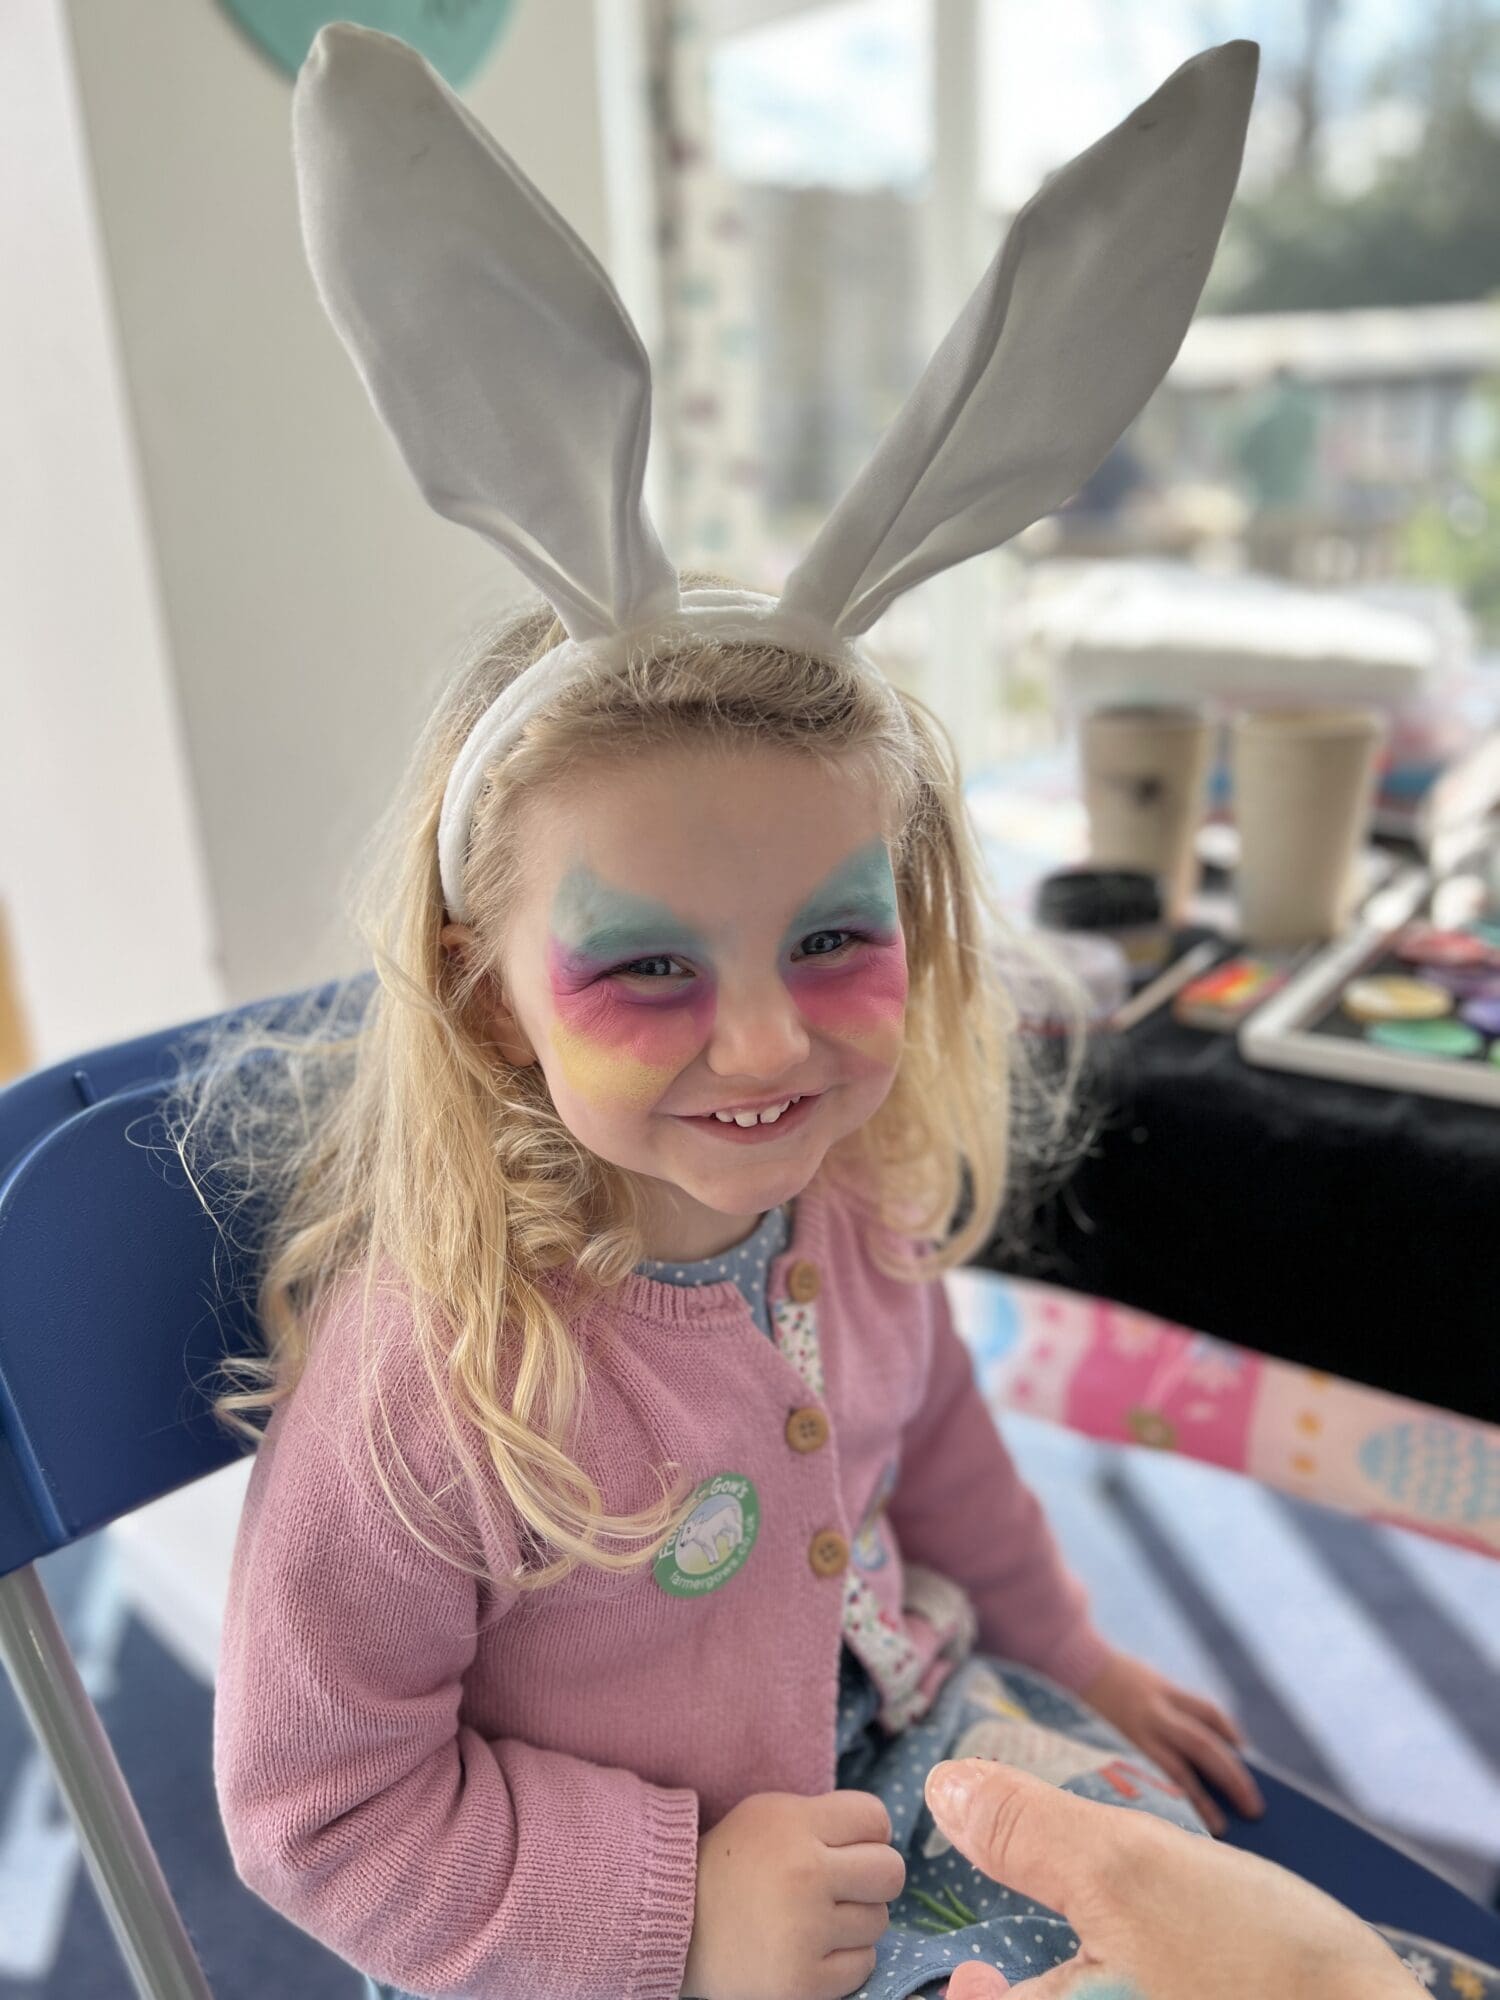 a blonde haired girl smiling with facepaint and a set of bunny ears on